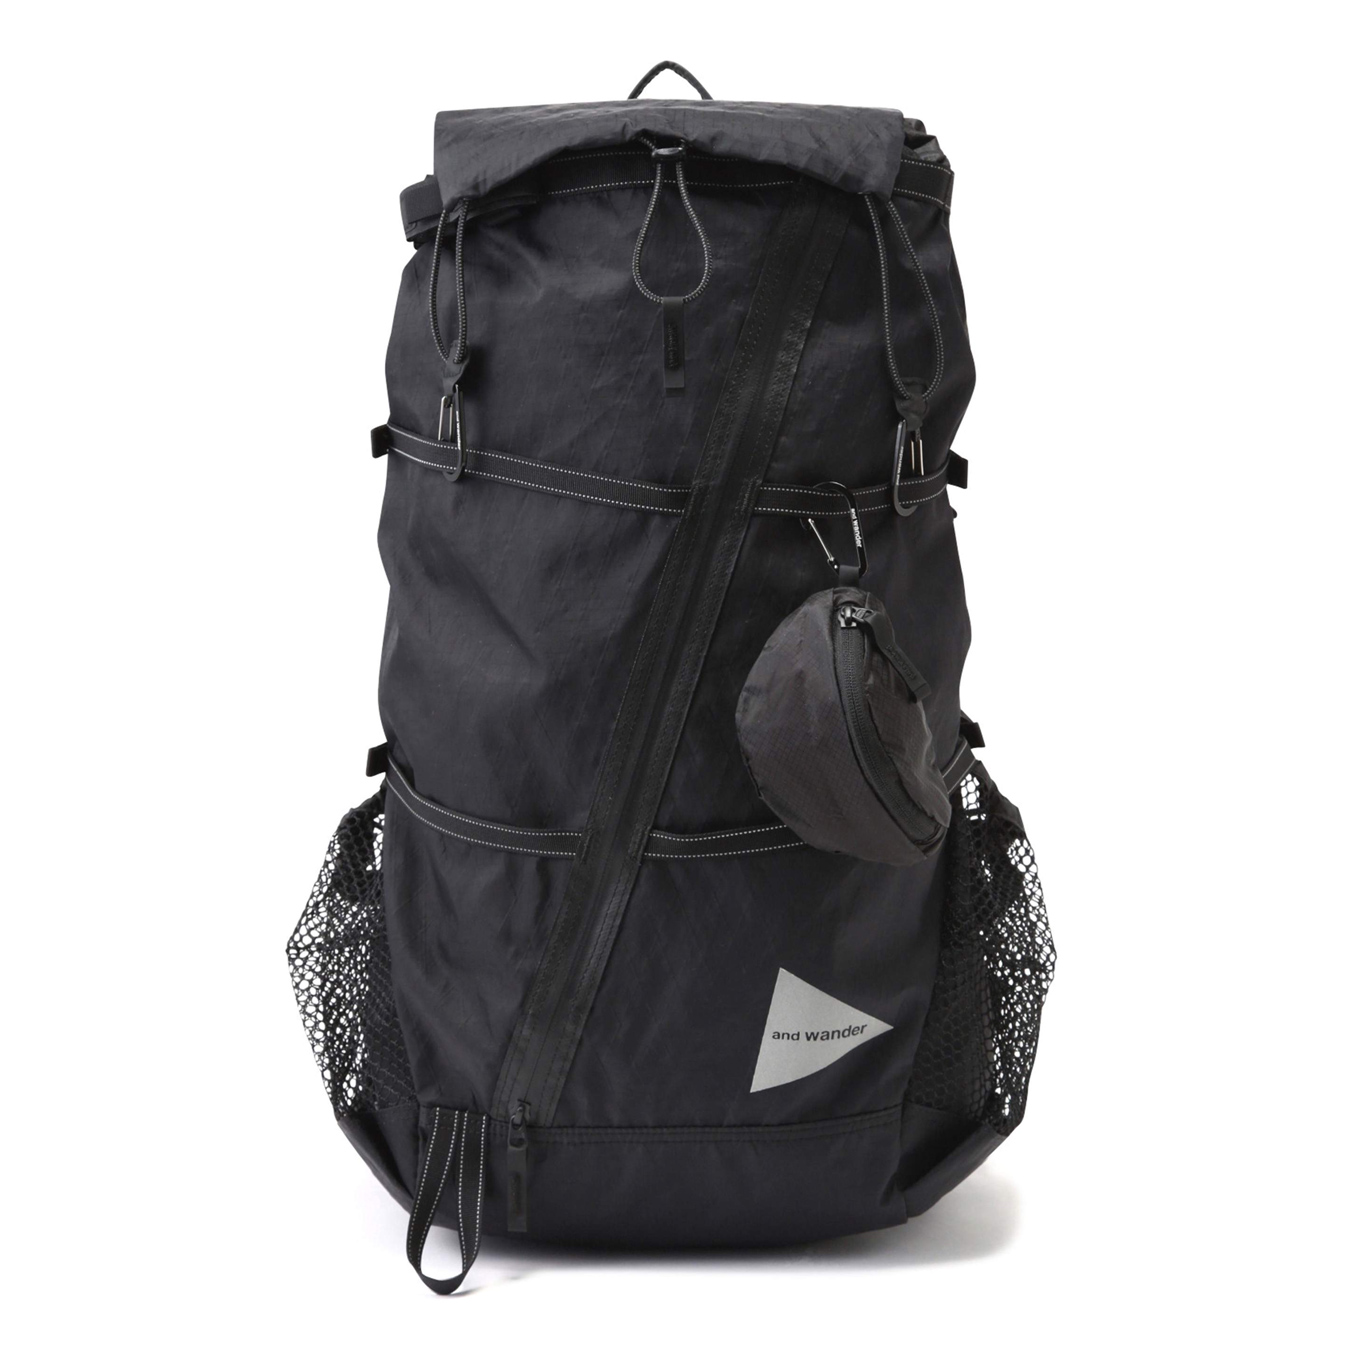 and wander / アンドワンダー | X-Pac 40L backpack - Black | 通販 ...